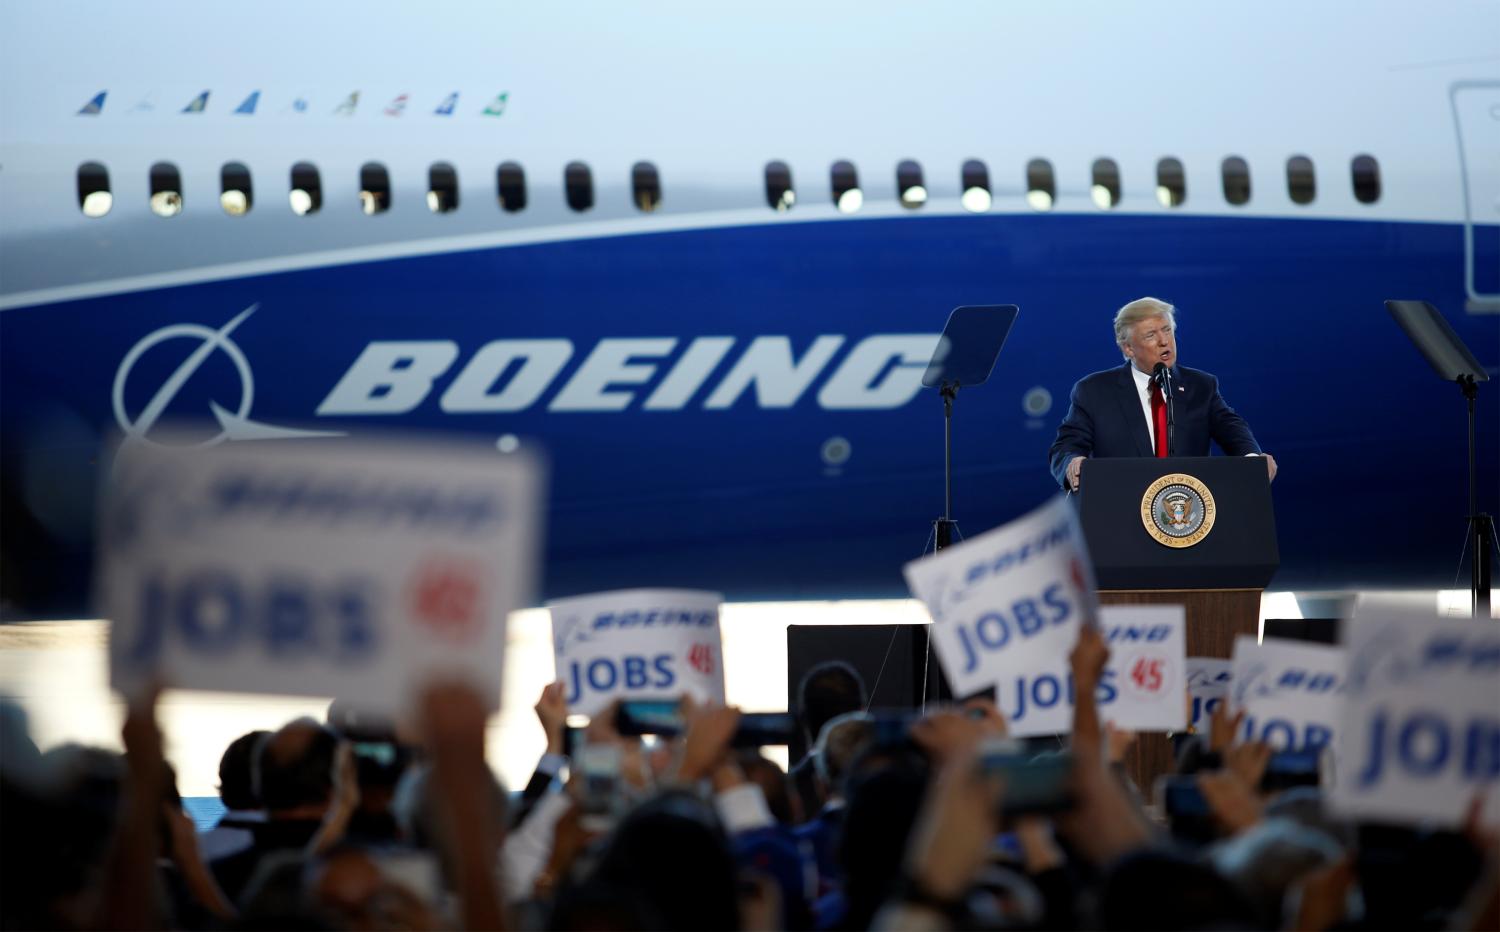 US President Donald Trump speaks to the crowd during a ceremony celebrating the rollout of the Boeing 787-10 Dreamliner at the Boeing South Carolina plant.